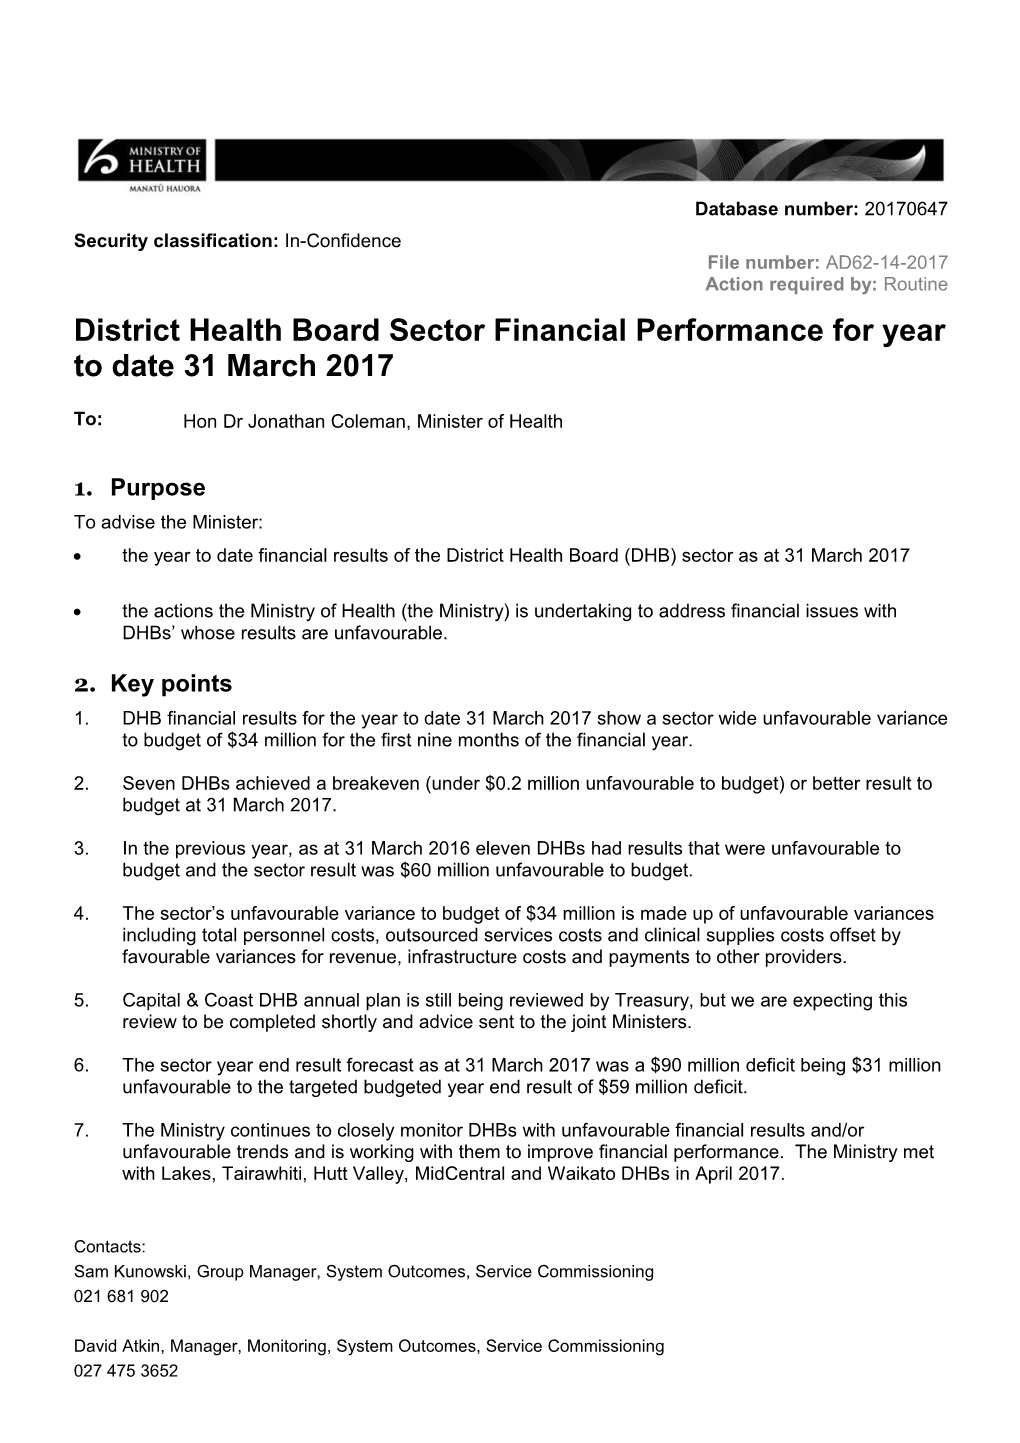 District Health Board Sector Financial Performance for Year to Date 31March 2017